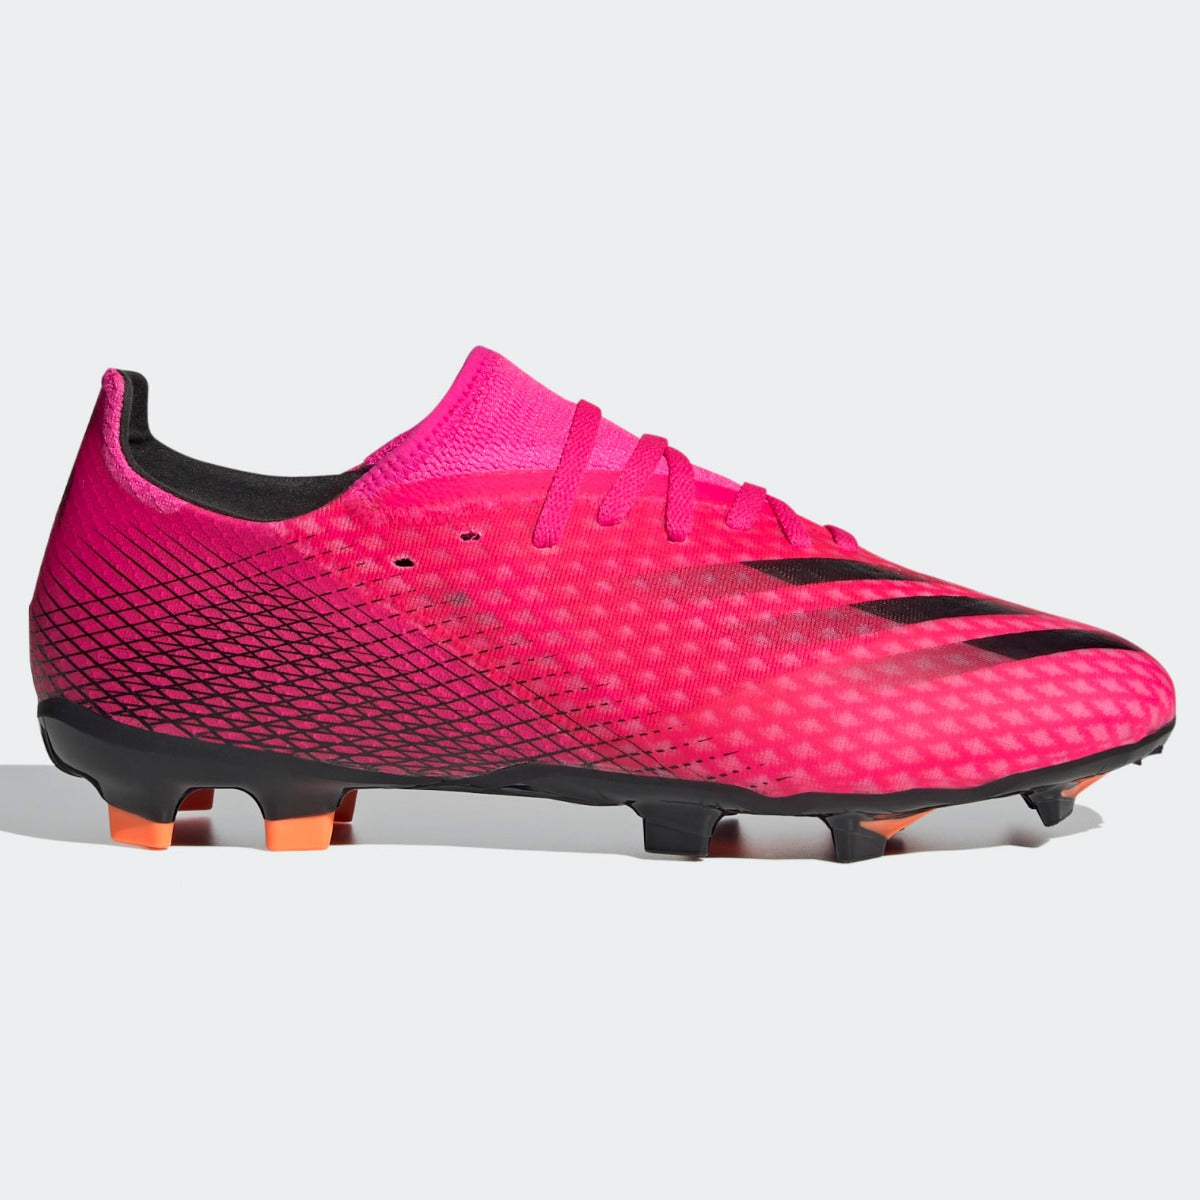 Adidas X Ghosted .3 FG - Pink-Black (Side 1)